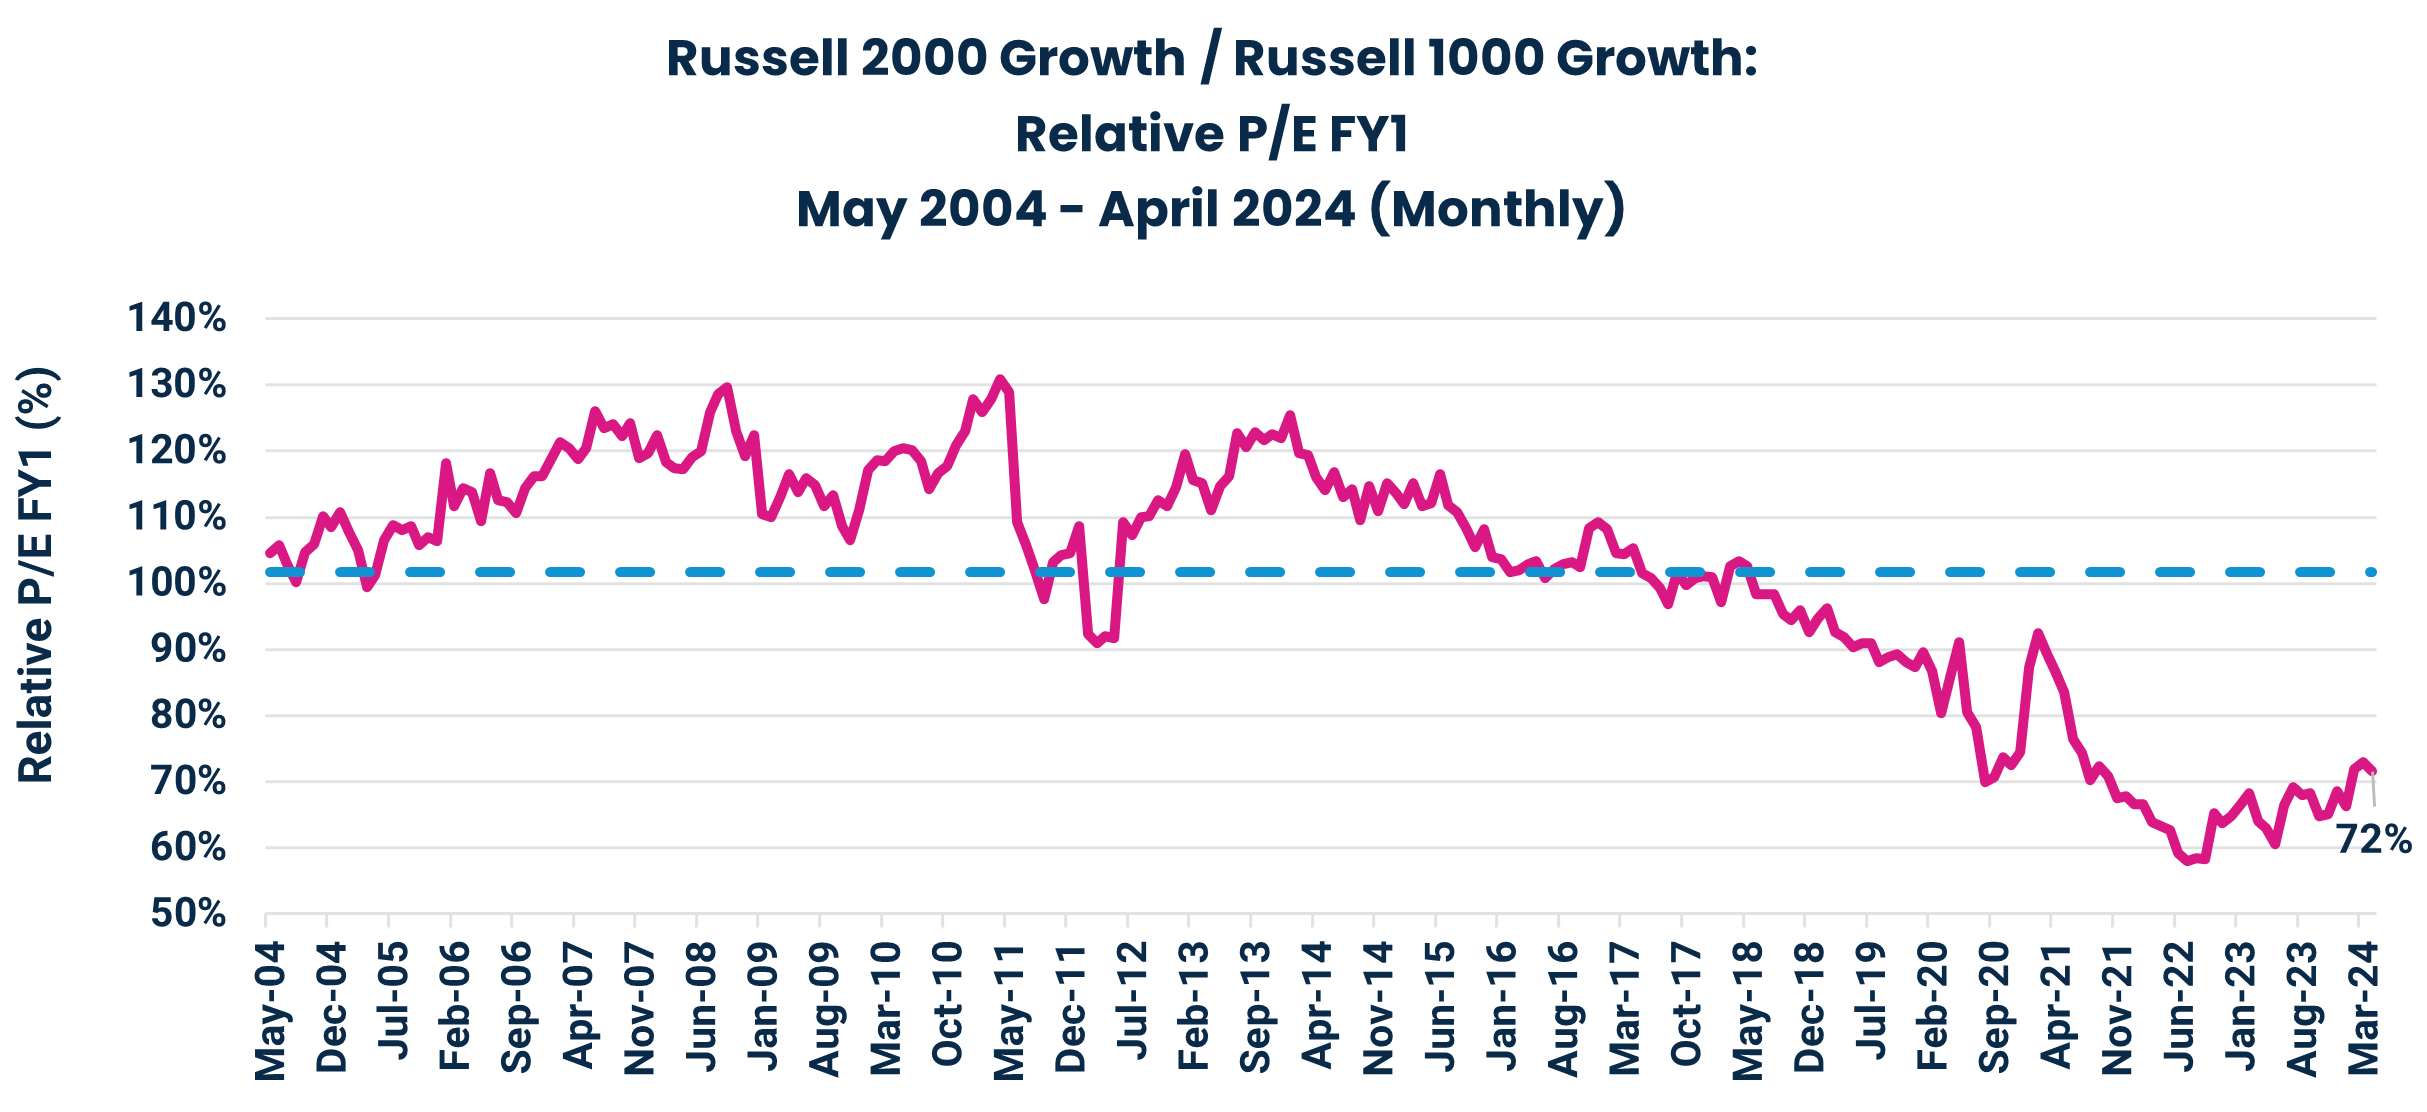 Russell 2000 Growth / Russell 1000 Growth:
Relative P/E FY1
May 2004 - April 2024 (Monthly)